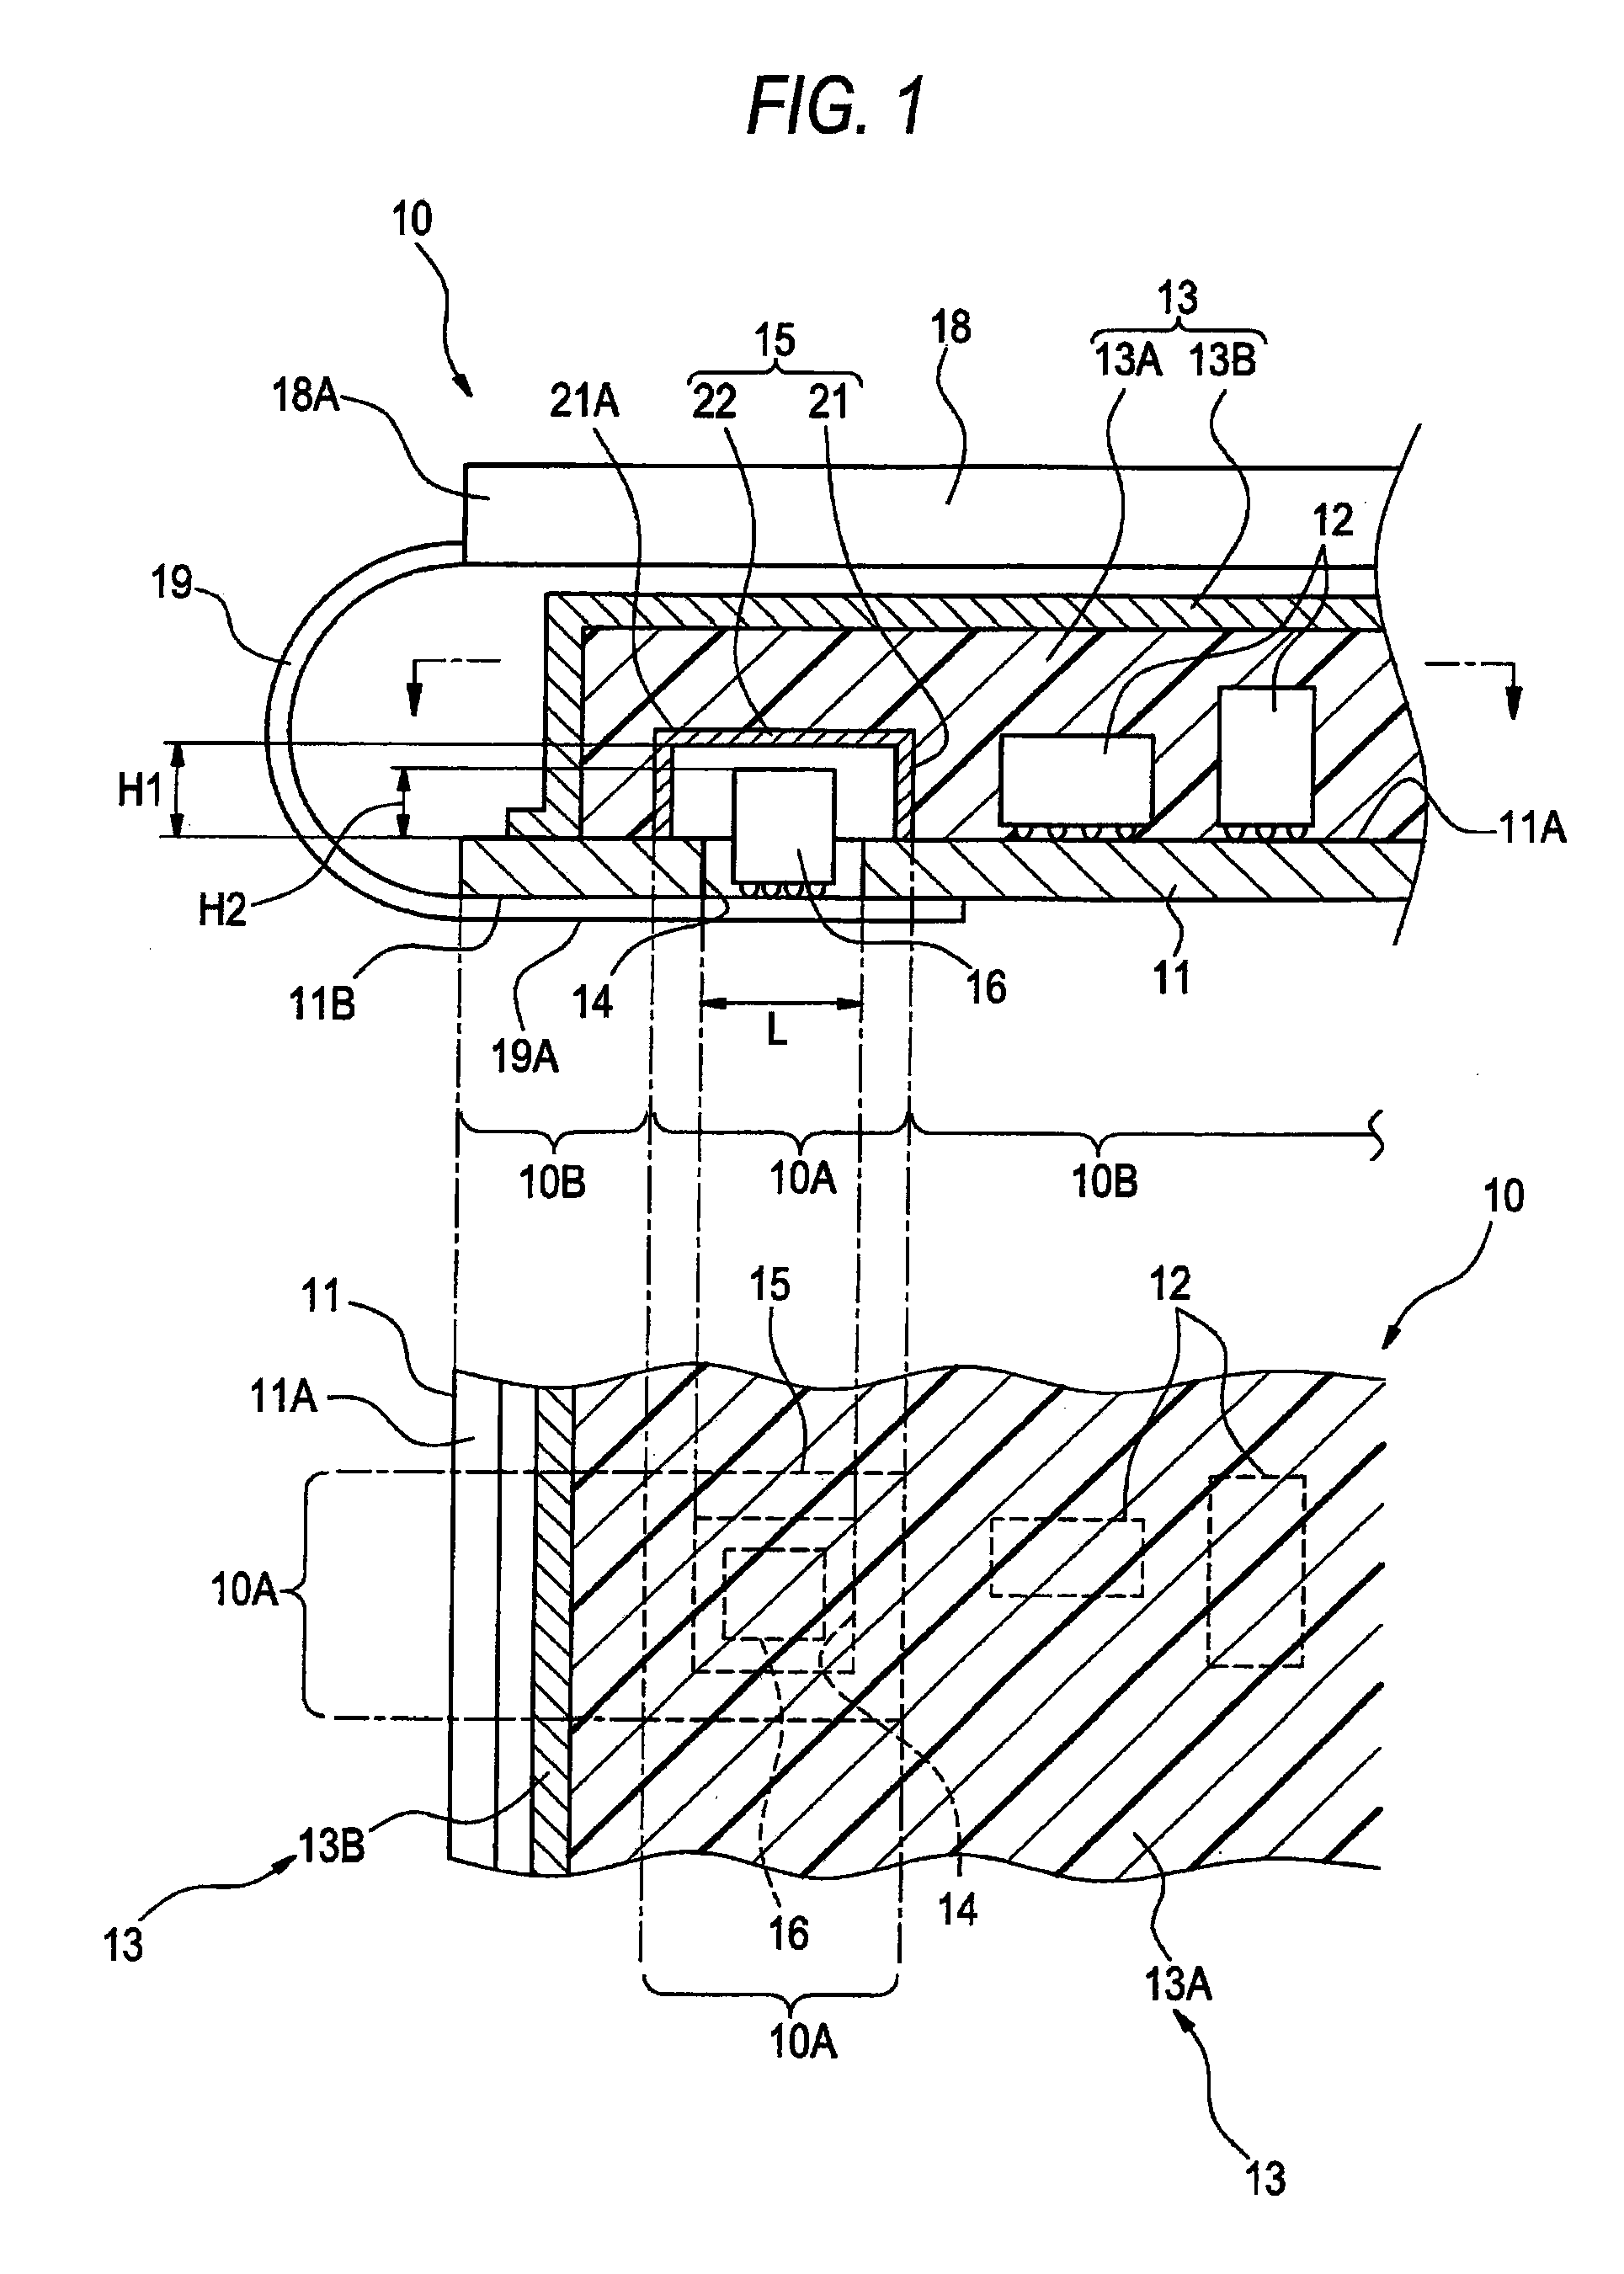 Substrate structure and electronic apparatus